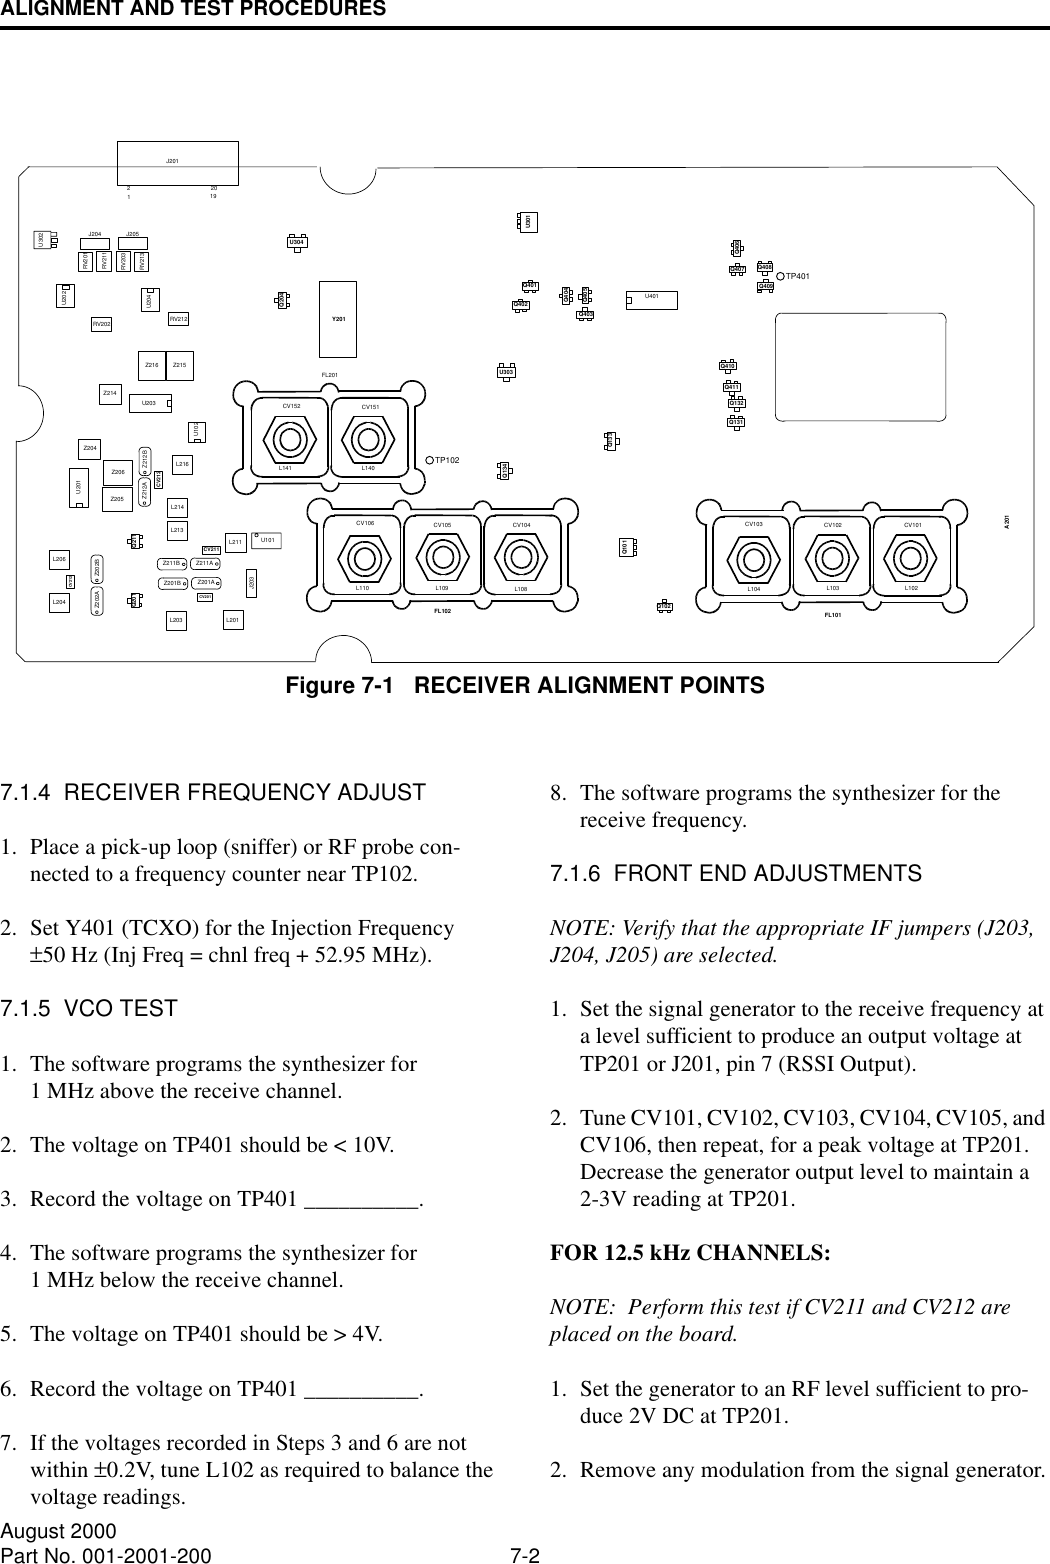 ALIGNMENT AND TEST PROCEDURES7-2August 2000Part No. 001-2001-2007.1.4  RECEIVER FREQUENCY ADJUST1. Place a pick-up loop (sniffer) or RF probe con-nected to a frequency counter near TP102.2. Set Y401 (TCXO) for the Injection Frequency ±50 Hz (Inj Freq = chnl freq + 52.95 MHz).7.1.5  VCO TEST1. The software programs the synthesizer for 1 MHz above the receive channel.2. The voltage on TP401 should be &lt; 10V.3. Record the voltage on TP401 __________.4. The software programs the synthesizer for 1 MHz below the receive channel.5. The voltage on TP401 should be &gt; 4V.6. Record the voltage on TP401 __________.7. If the voltages recorded in Steps 3 and 6 are not within ±0.2V, tune L102 as required to balance the voltage readings.8. The software programs the synthesizer for the receive frequency.7.1.6  FRONT END ADJUSTMENTSNOTE: Verify that the appropriate IF jumpers (J203, J204, J205) are selected.1. Set the signal generator to the receive frequency at a level sufficient to produce an output voltage at TP201 or J201, pin 7 (RSSI Output).2. Tune CV101, CV102, CV103, CV104, CV105, and CV106, then repeat, for a peak voltage at TP201.  Decrease the generator output level to maintain a 2-3V reading at TP201.FOR 12.5 kHz CHANNELS:NOTE:  Perform this test if CV211 and CV212 are placed on the board.  1. Set the generator to an RF level sufficient to pro-duce 2V DC at TP201.2. Remove any modulation from the signal generator.Figure 7-1   RECEIVER ALIGNMENT POINTSU302J204 J205212019J201RV201RV211RV203RV213RV202 RV212U202U204Z216 Z215Z214Z204U102U203U201Z206Z205Z212BZ212ACV212L216L214L213L211L201L203L206L204U101CV211Q211CV212Q201J203CV201Z202BZ202AZ211AZ211BZ201B Z201AFL102FL201Q134Q133Q101Q102Q204Y201U304U301Q403Q405U303U401Q409Q406Q407 Q408Q410Q411FL101A201Q402Q401Q404Q132Q131TP401TP102CV152 CV151L141 L140CV106 CV105L110 L109CV104L108CV103 CV102L104 L103CV101L102